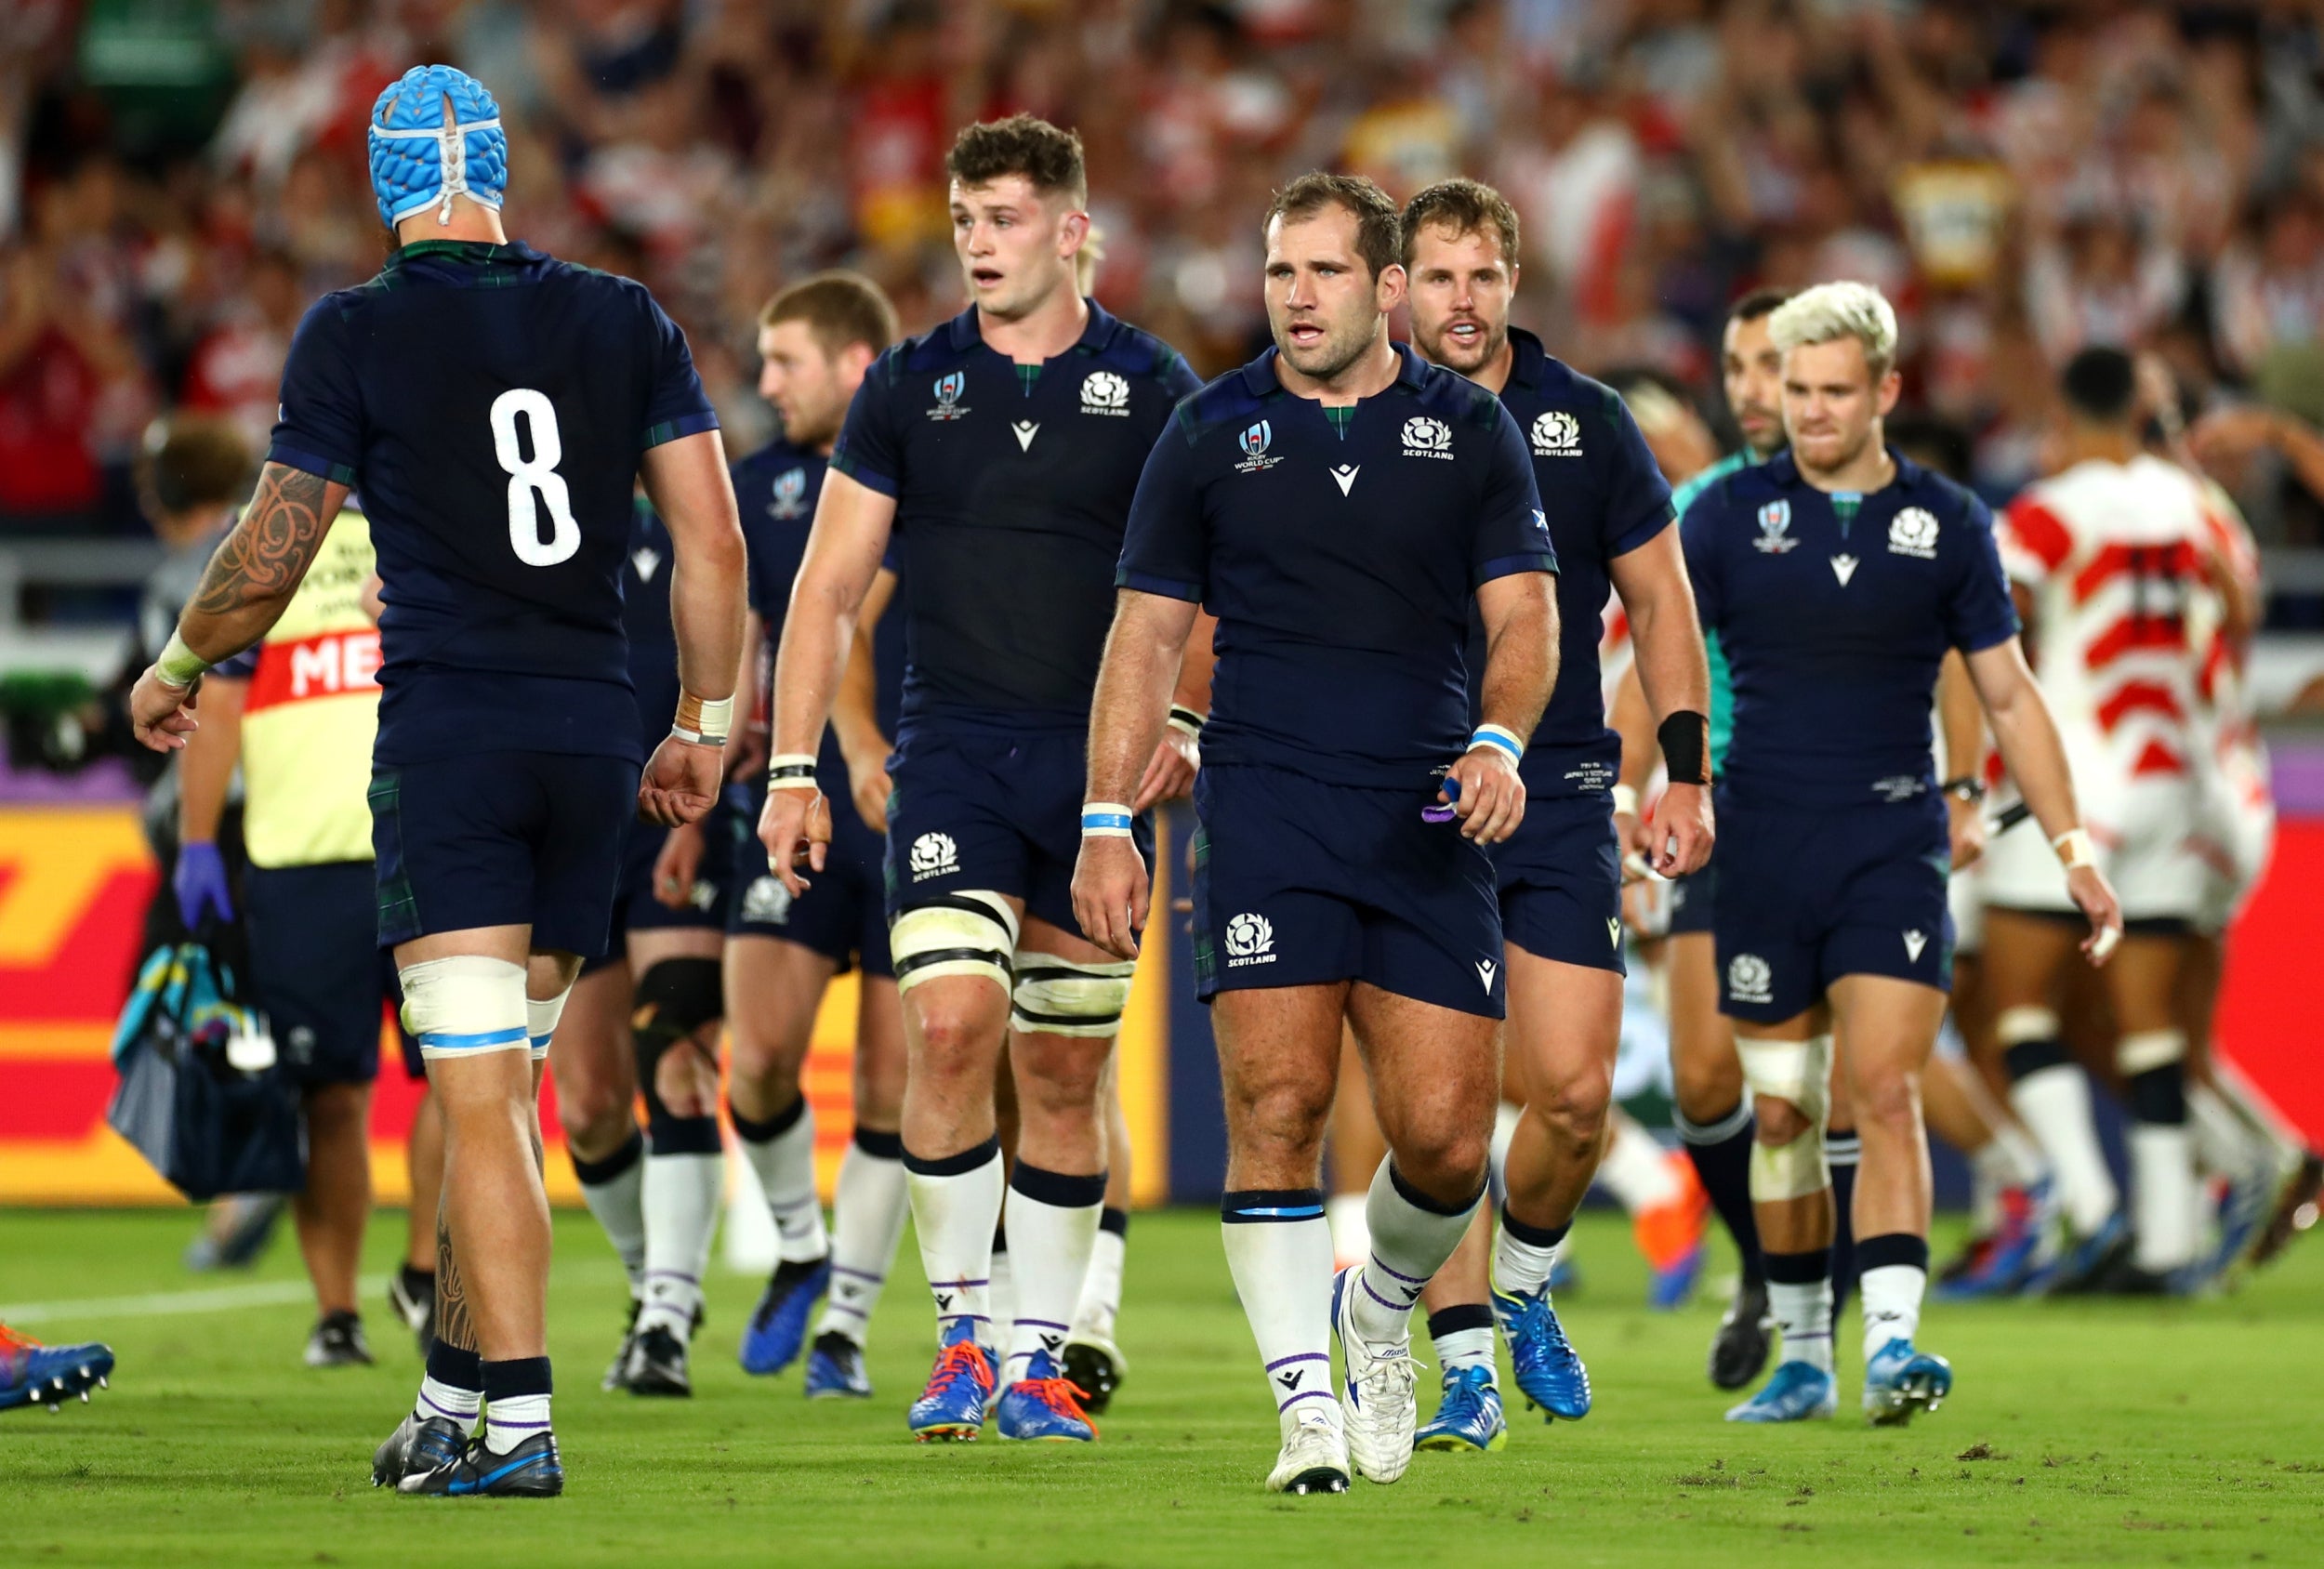 Scotland have been knocked out of the tournament (Getty)